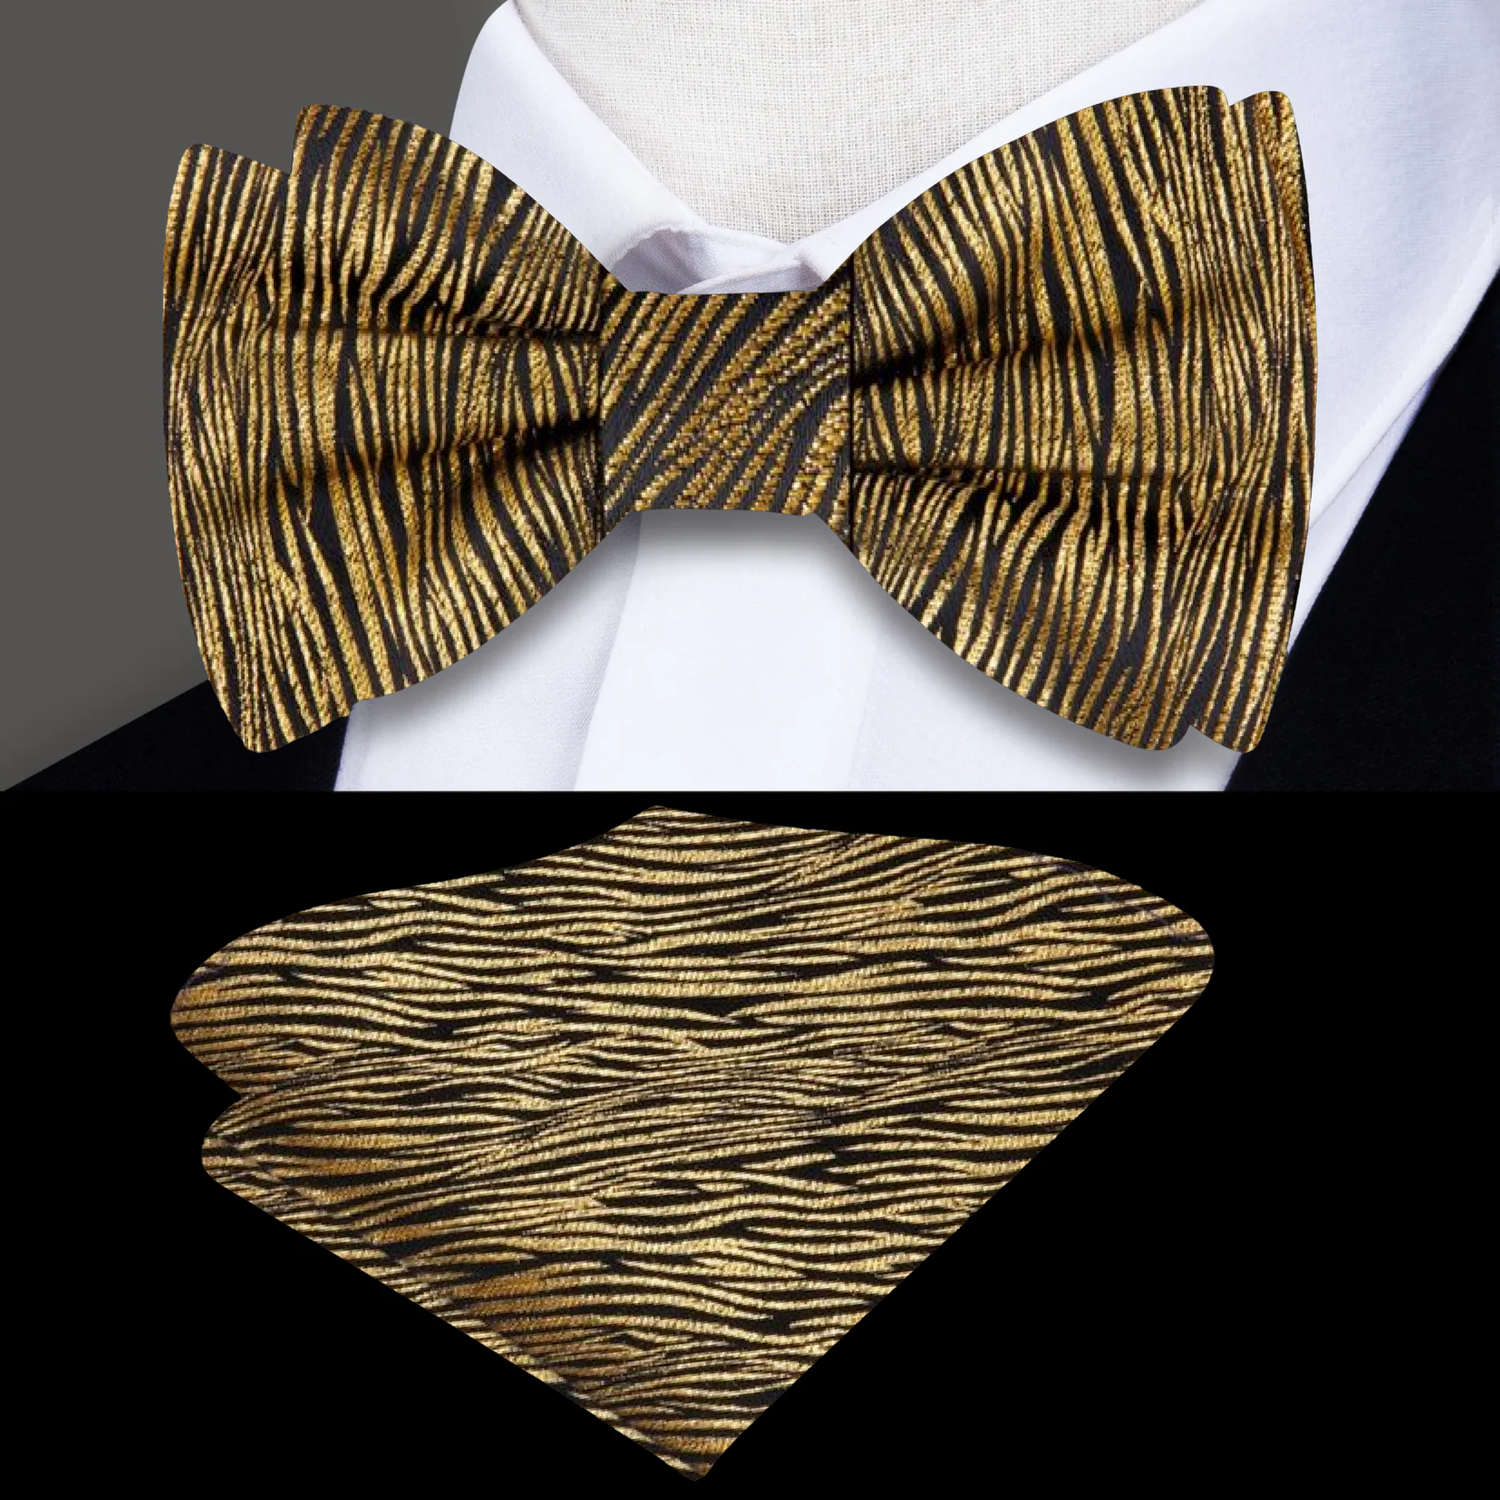 Black, Gold Zebra Texture Bow Tie and Pocket Square